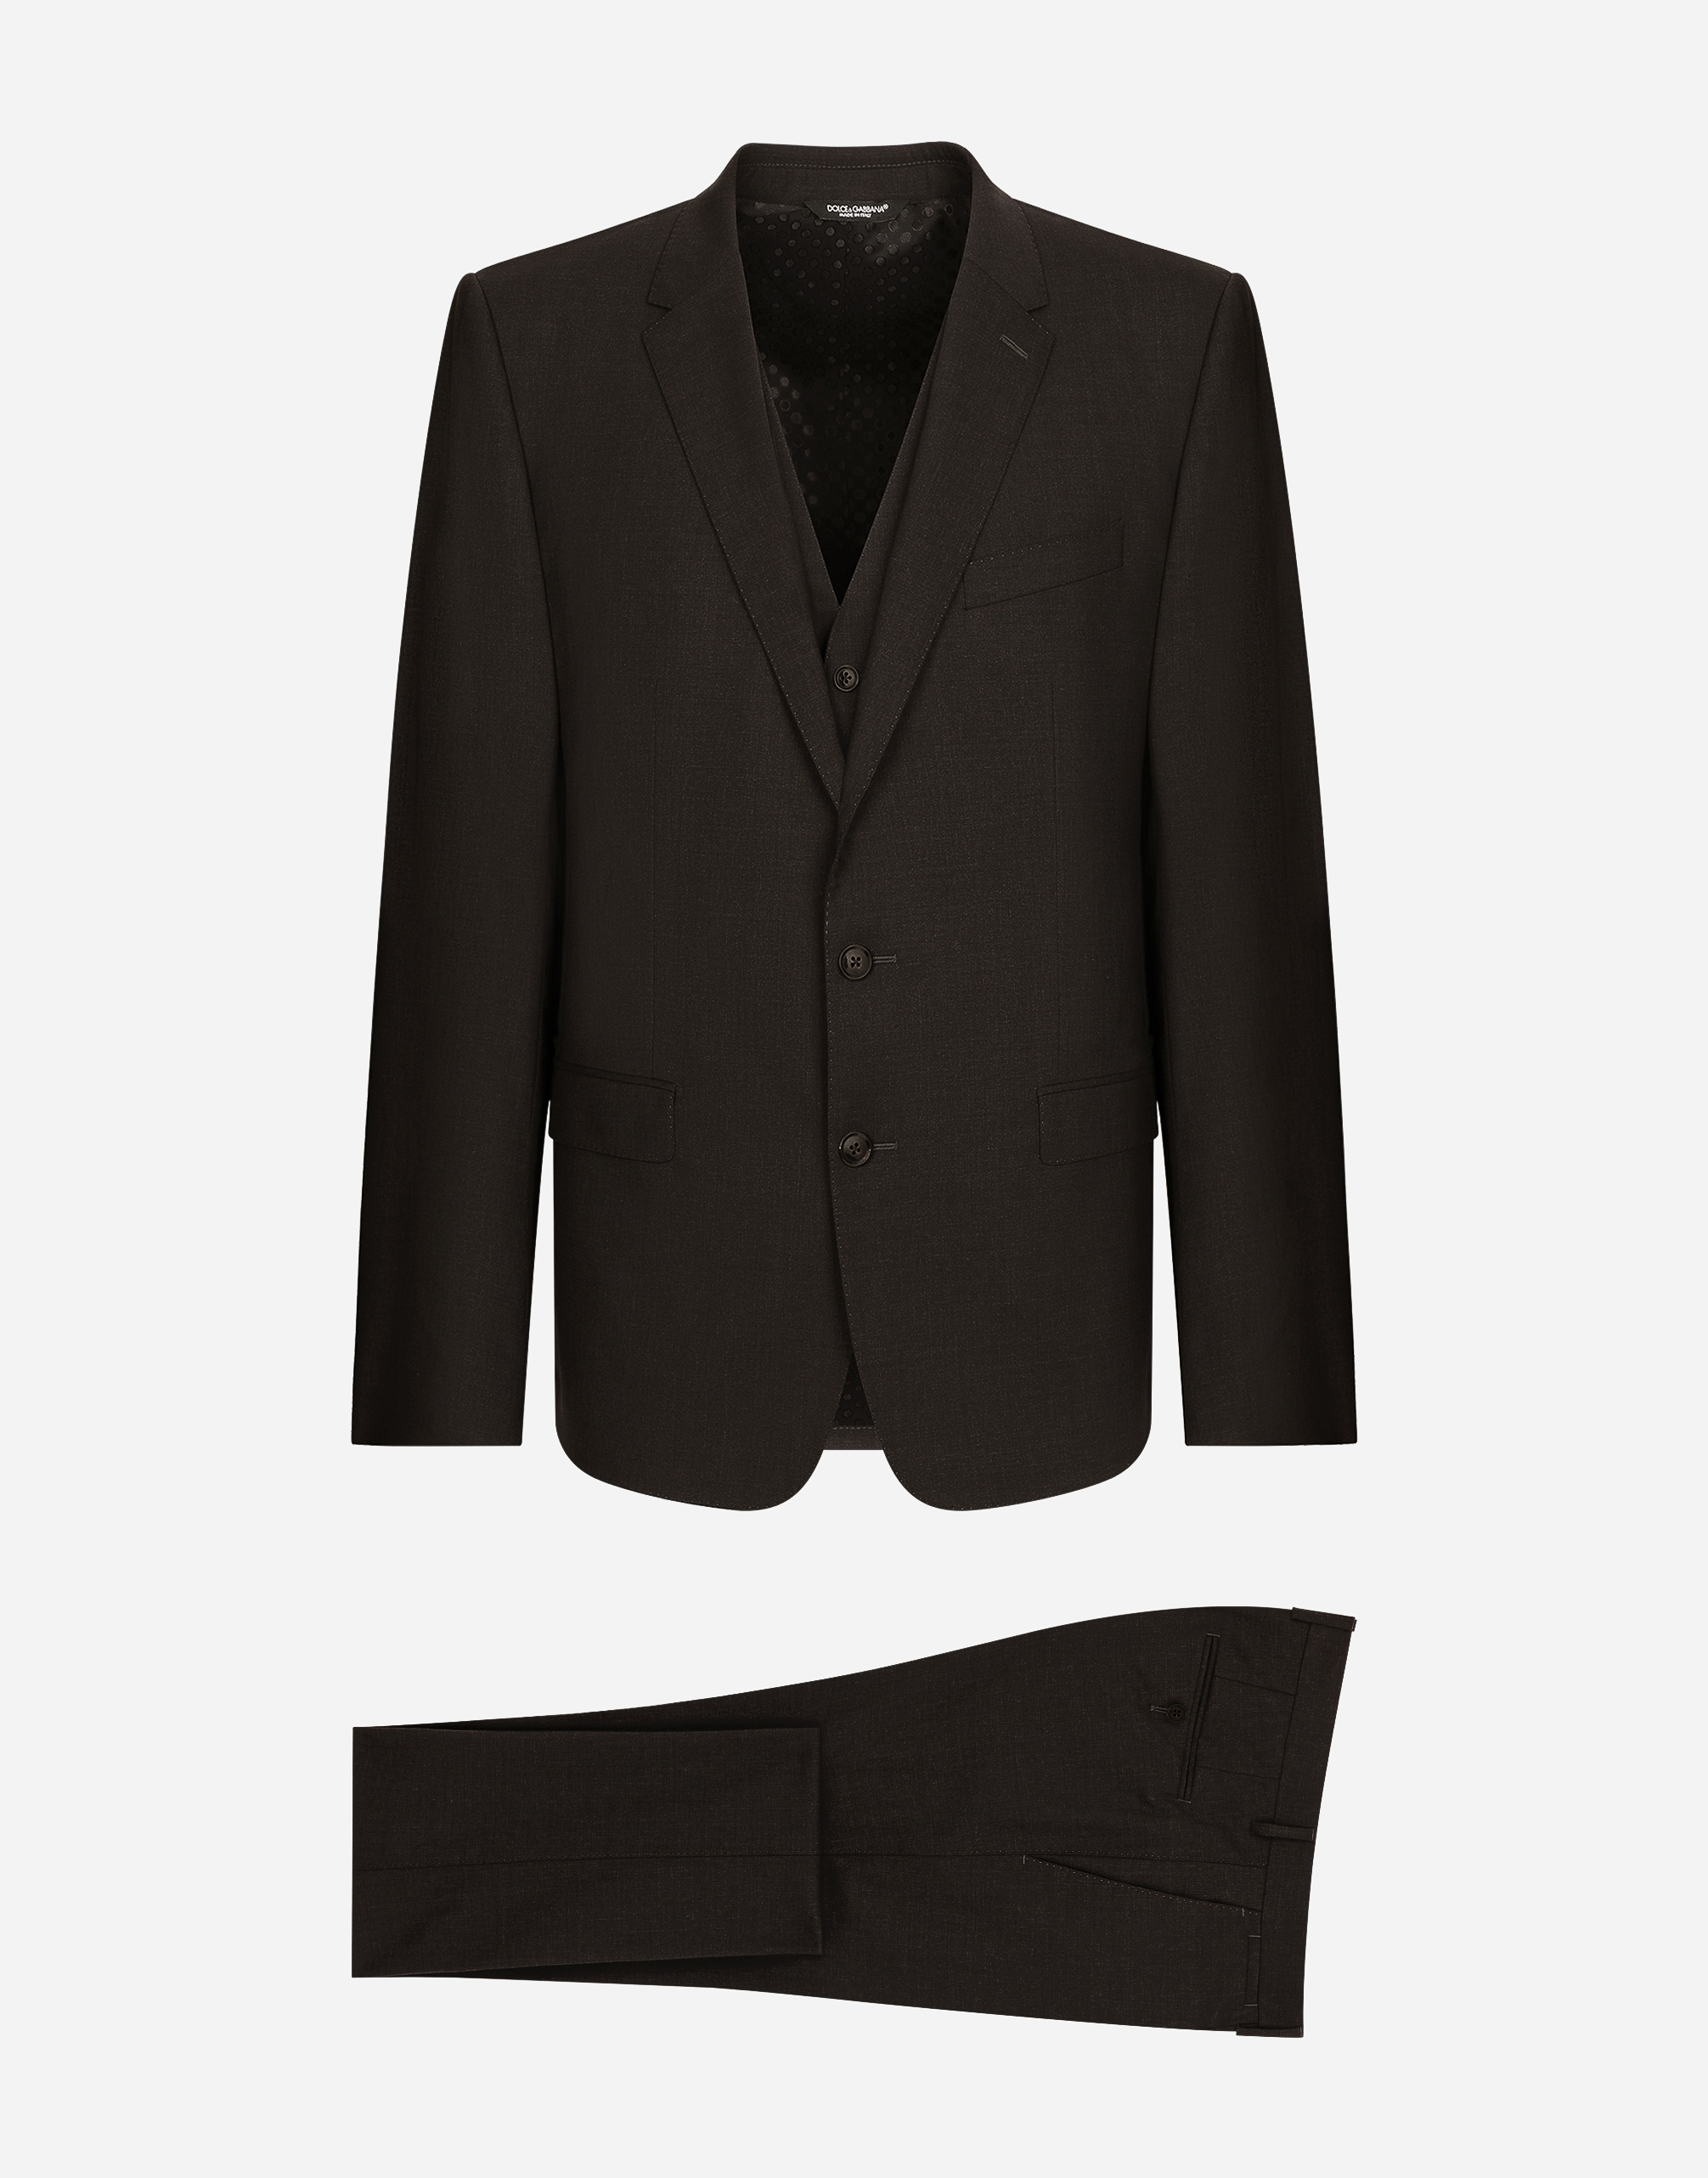 dolce and gabbana suit price